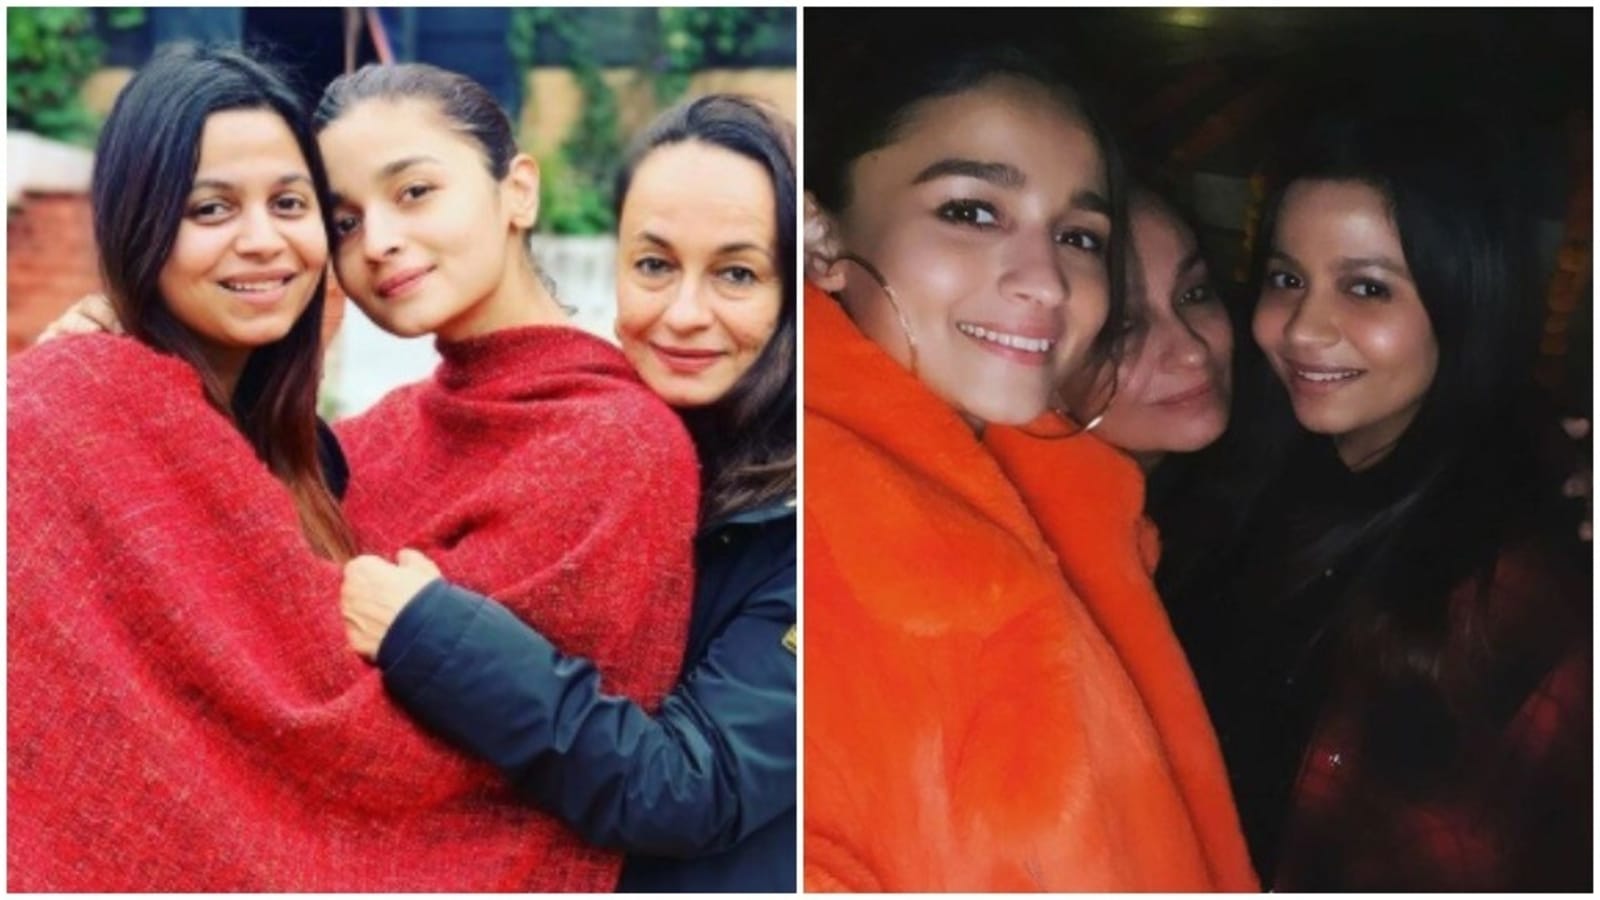 Alia Bhatt Xx Video - Alia Bhatt's mom Soni Razdan poses in throwback pic with her and Shaheen,  calls them 'best daughters ever' | Bollywood - Hindustan Times